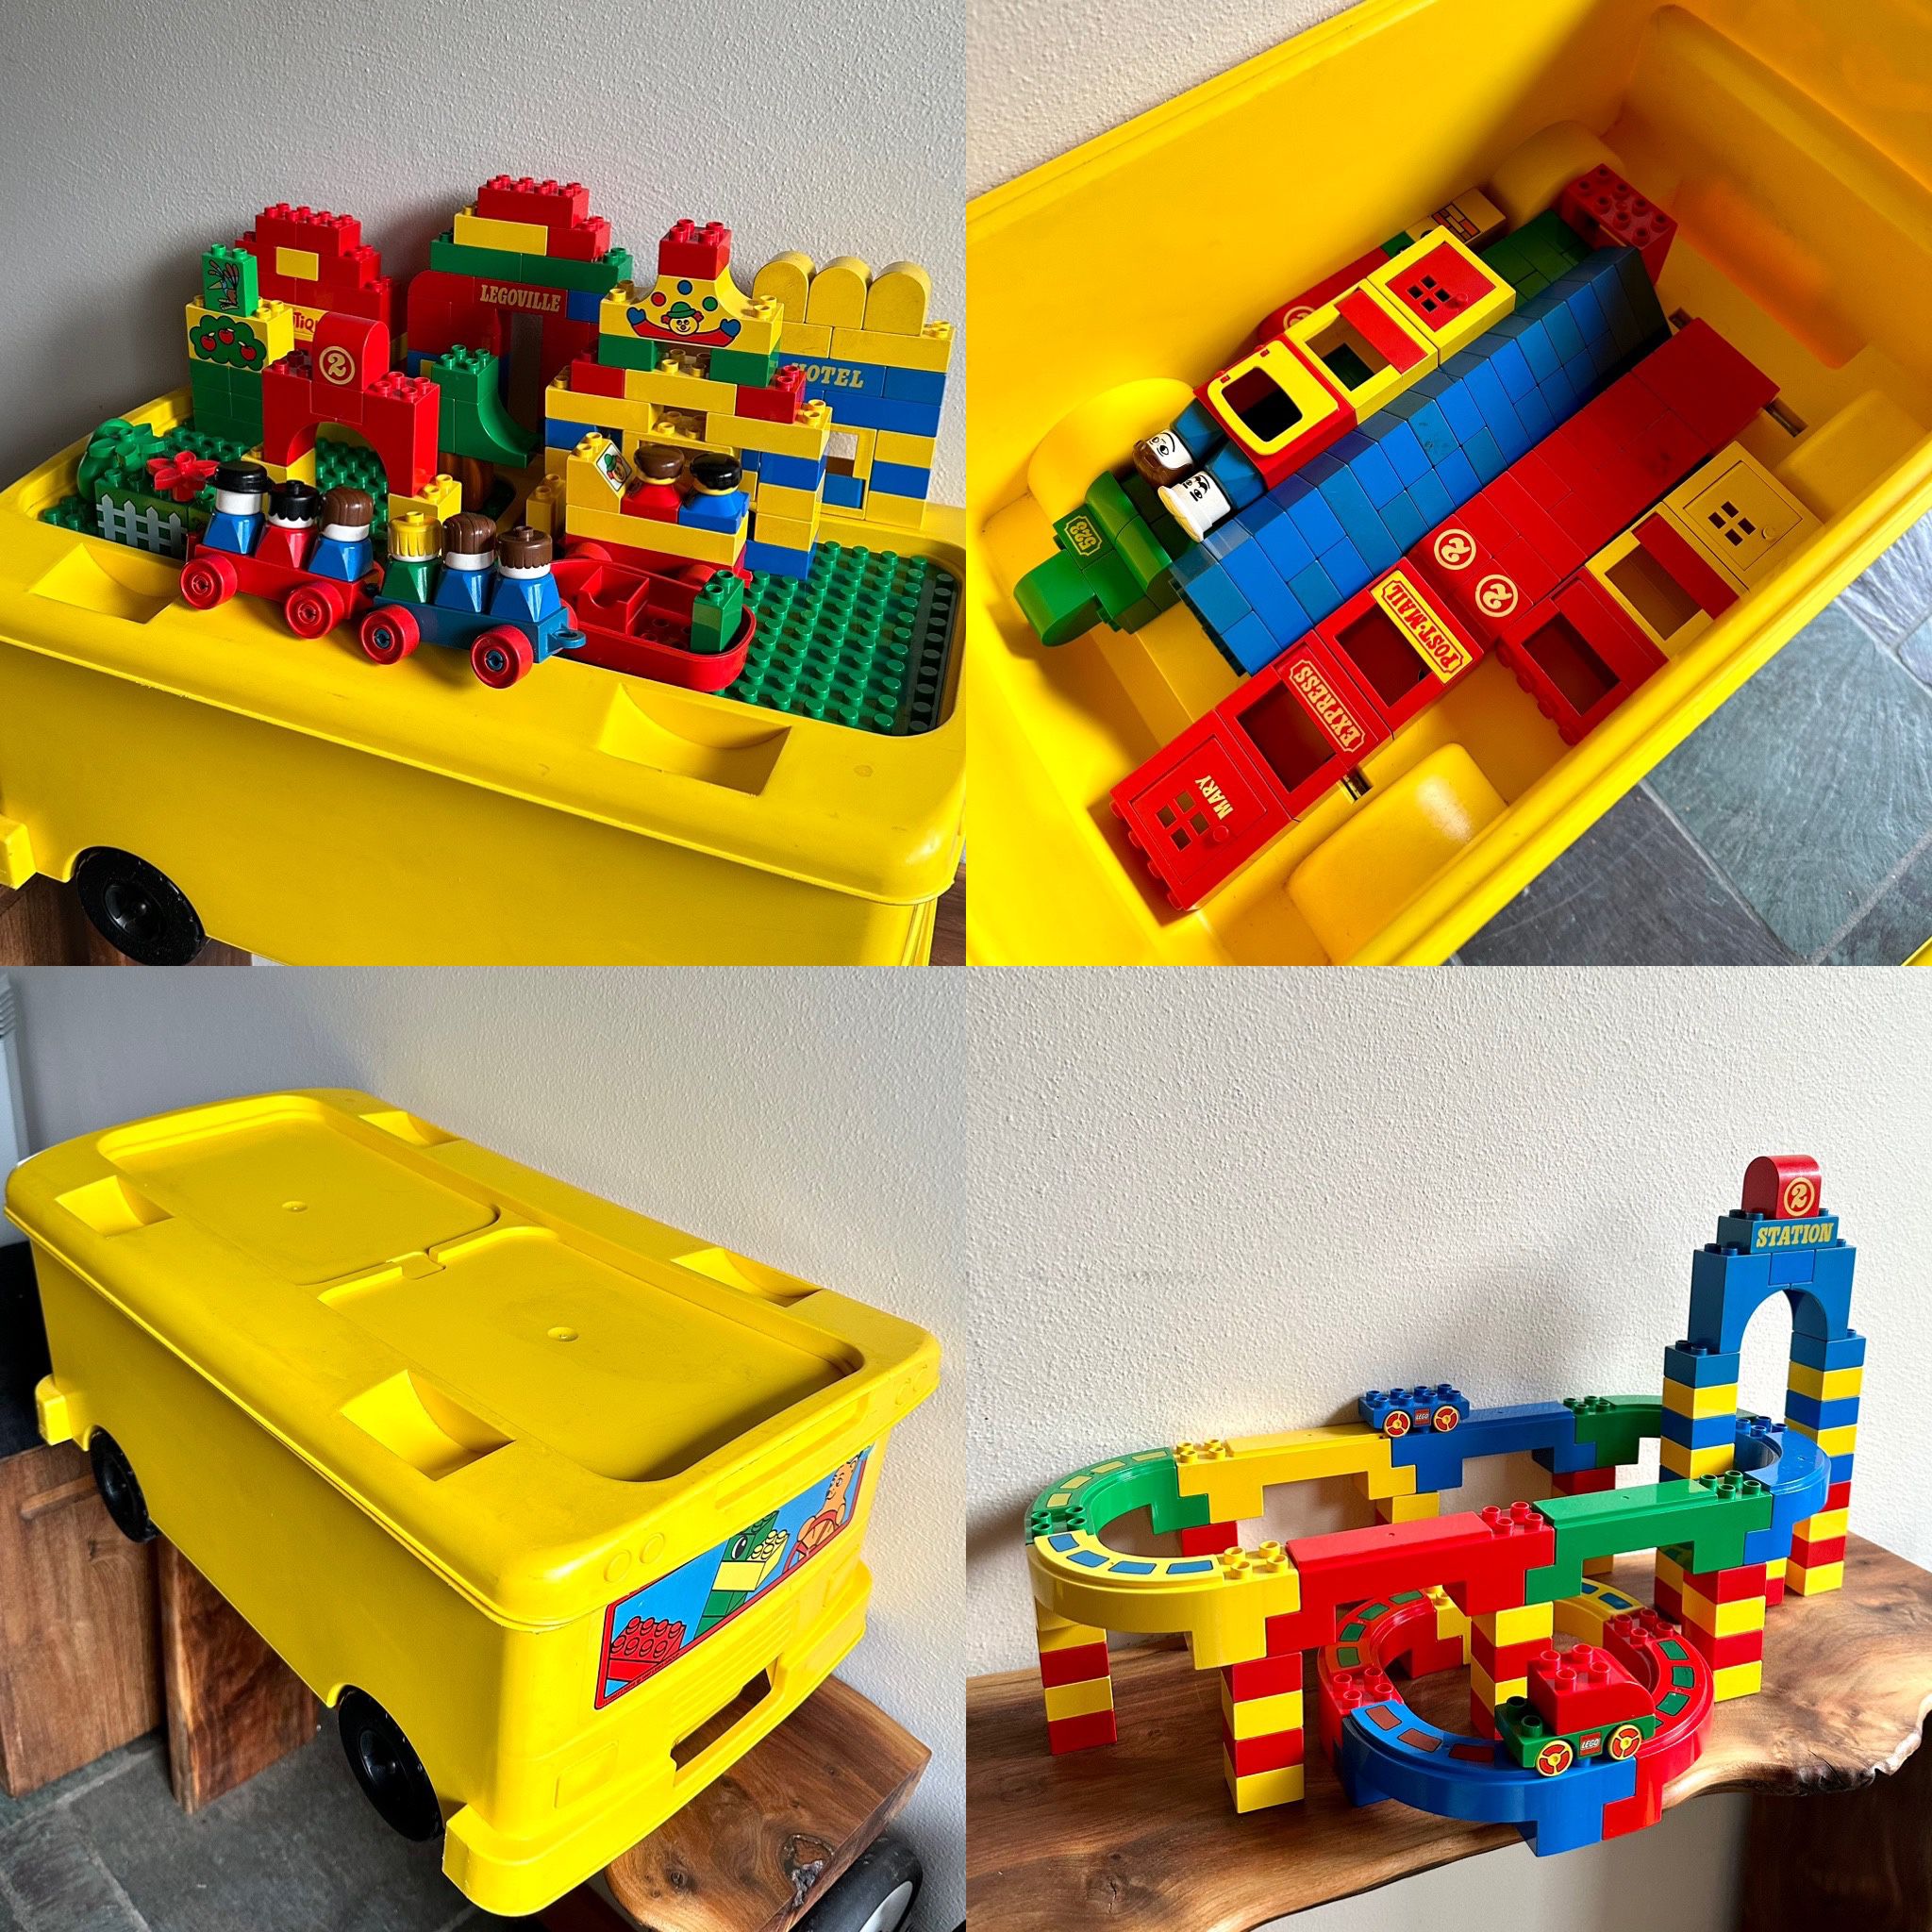 Solrig Verdensvindue Nordamerika Lego Duplo Ride-on School Bus Storage with Legoville Monorail and more for  Sale in Seattle, WA - OfferUp